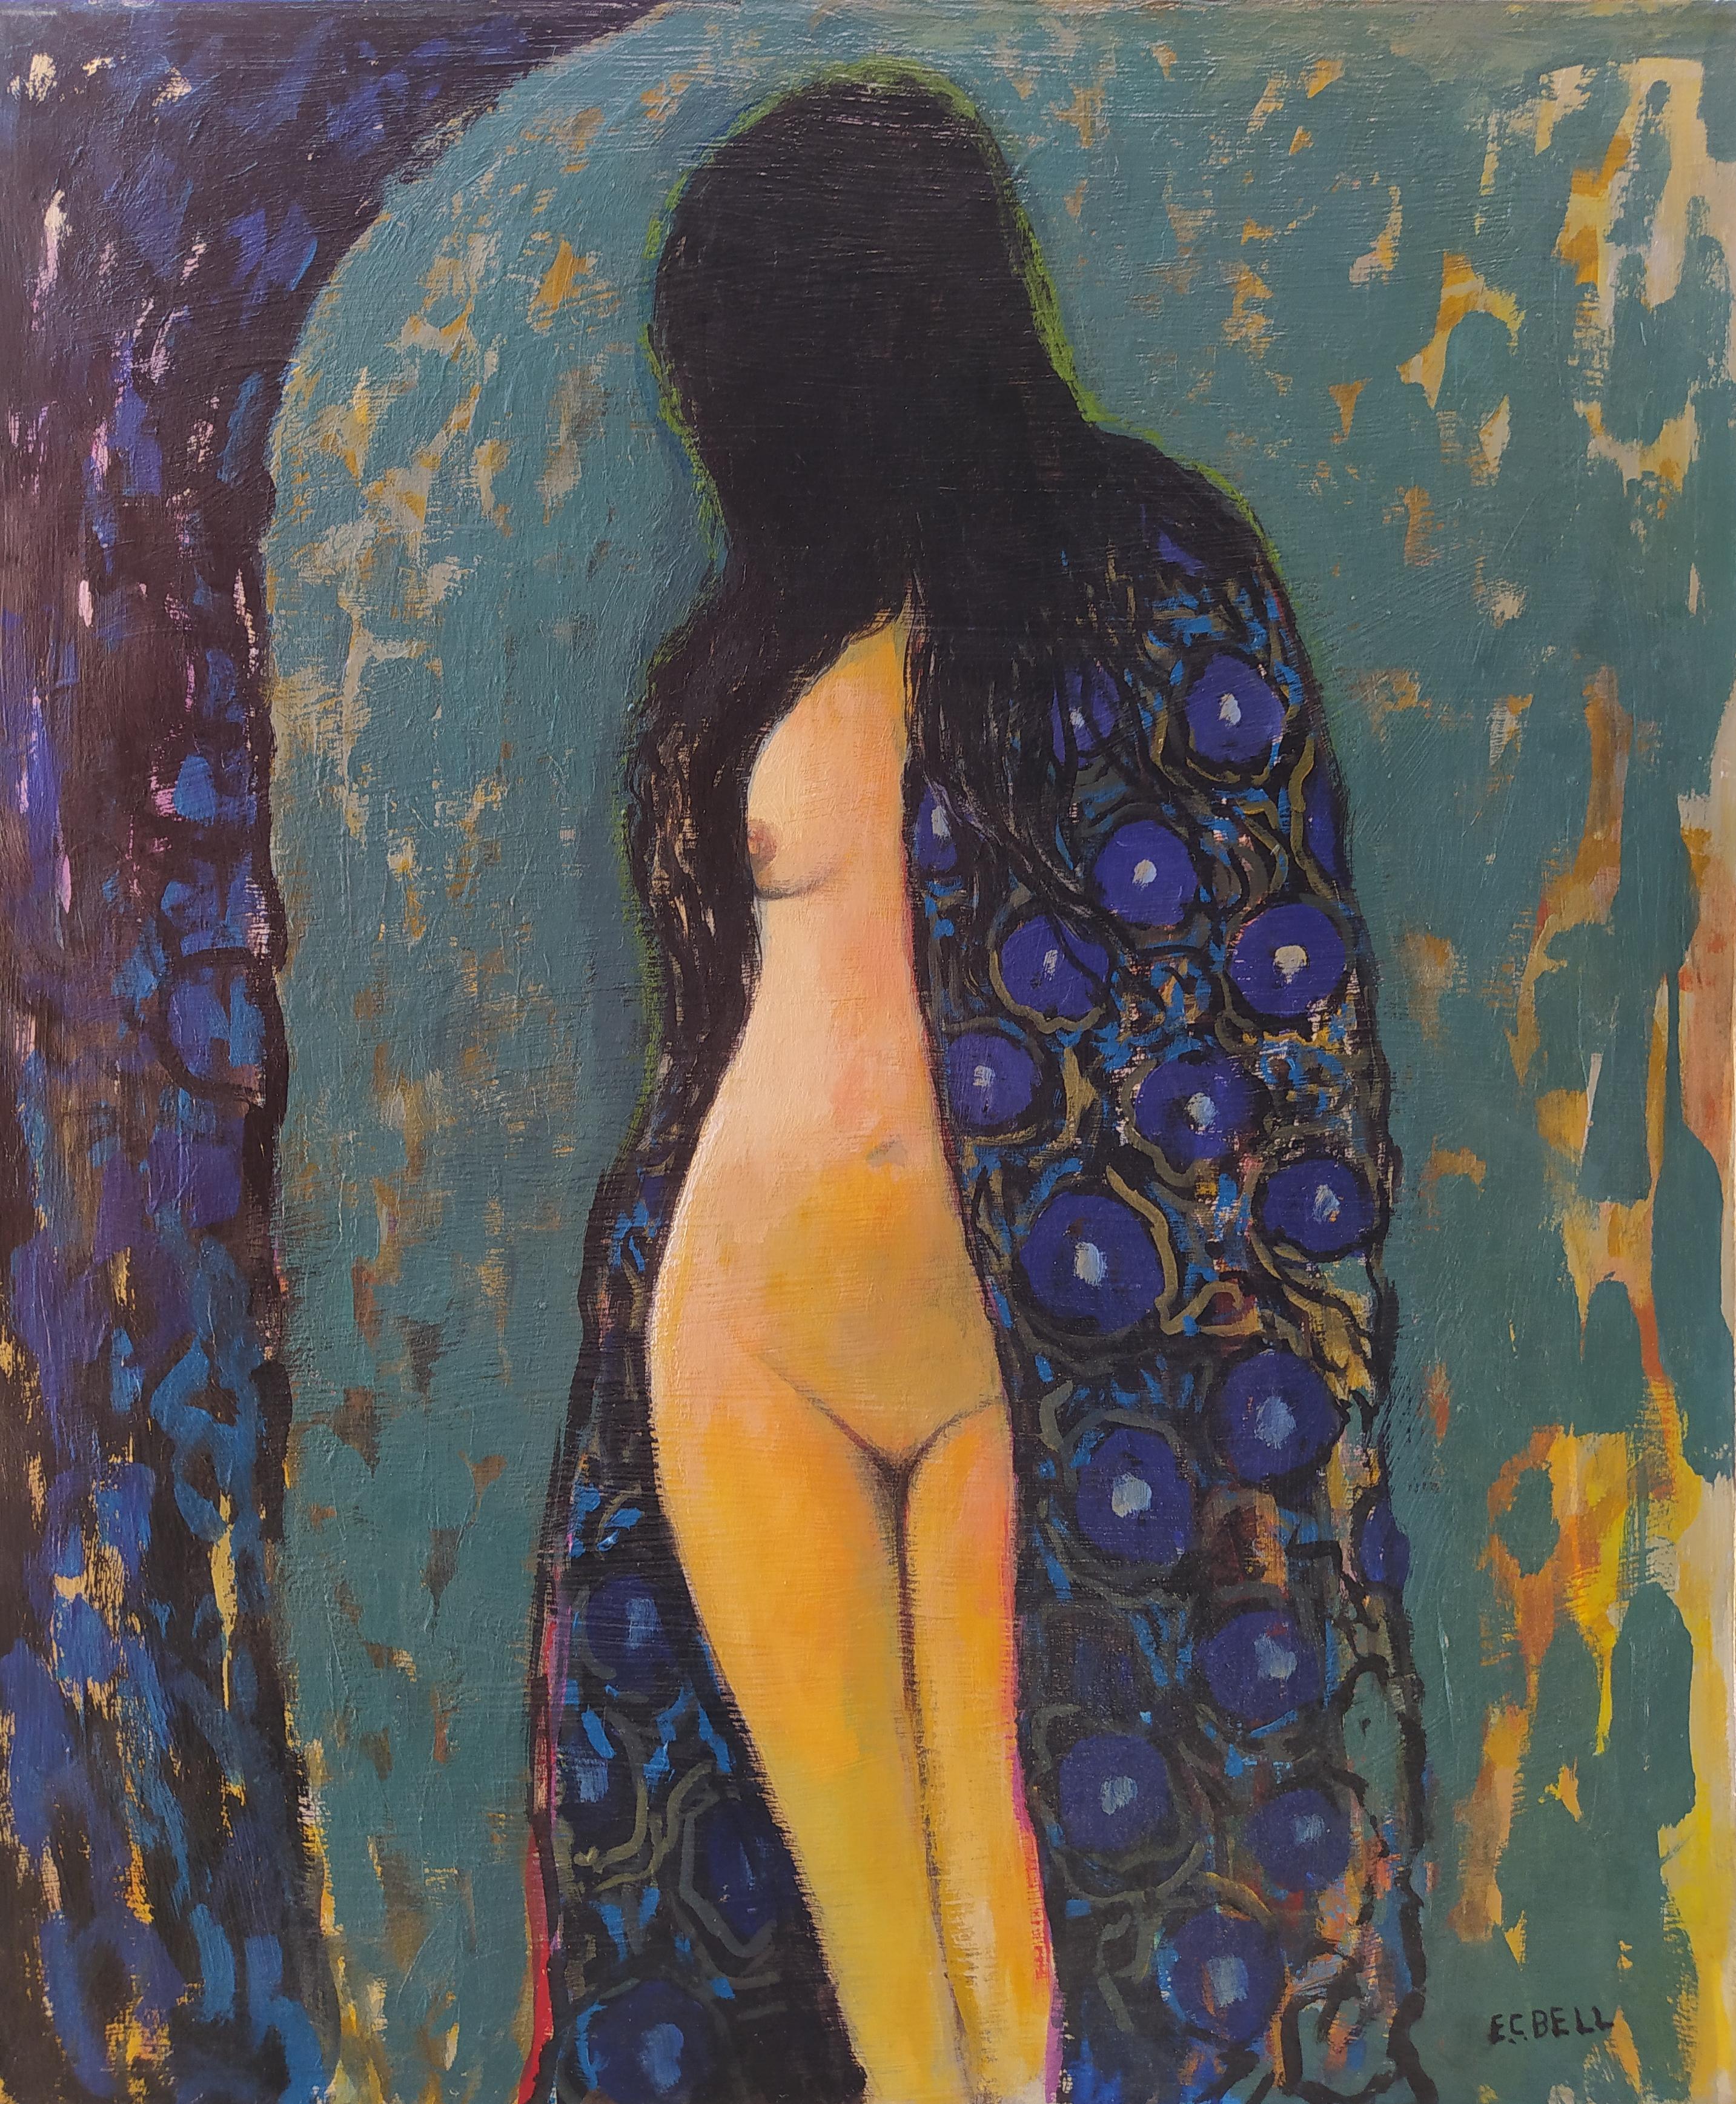 E.C. Bell Figurative Painting - "Morning Glory Gown" - Vertical expressionist female semi-nude with gown.